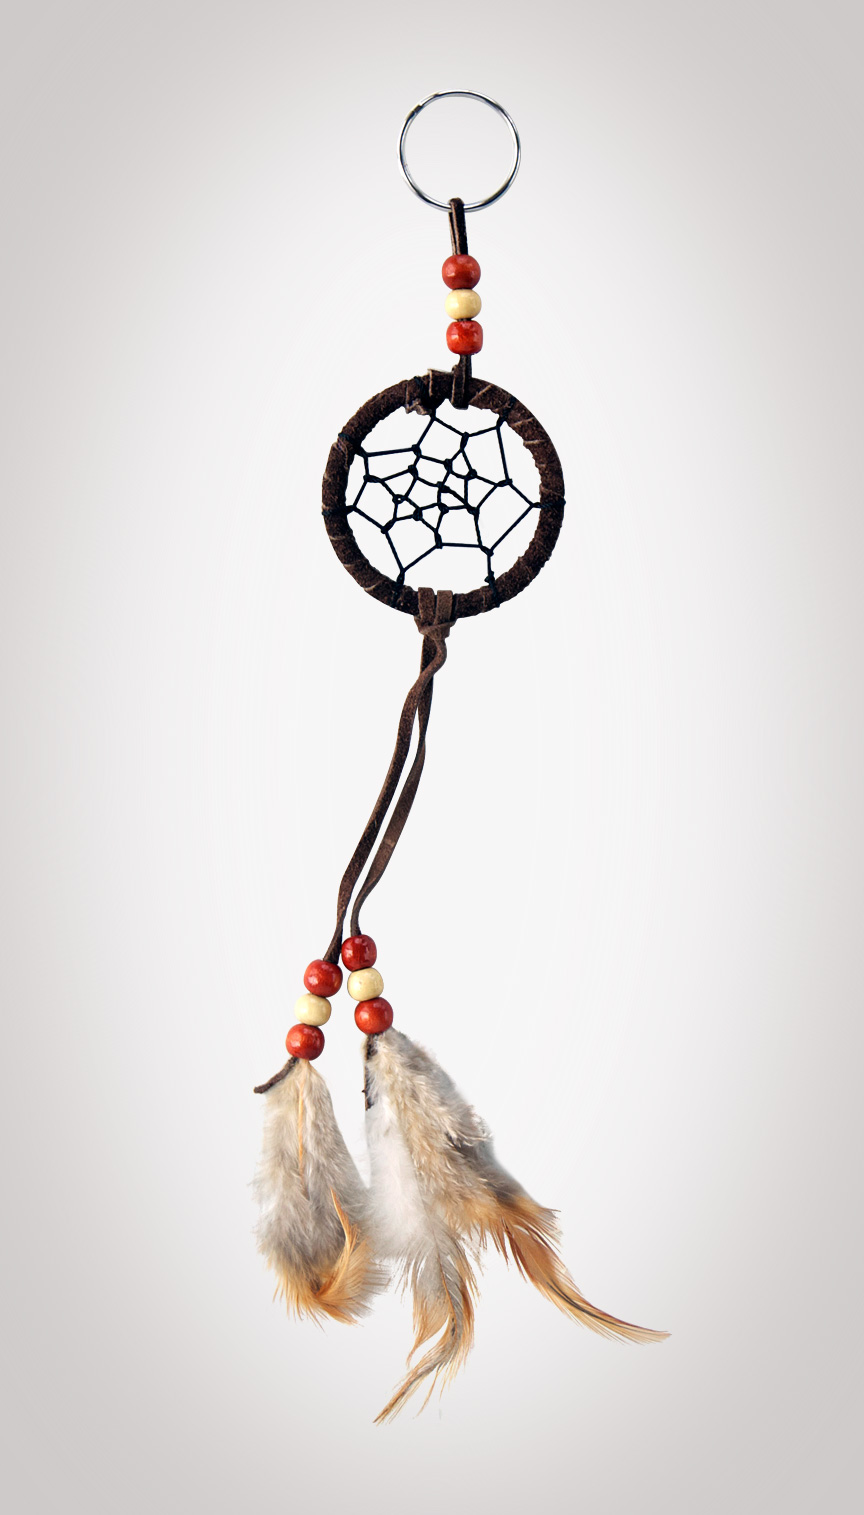 Shows an image of our dreamcatcher owg009